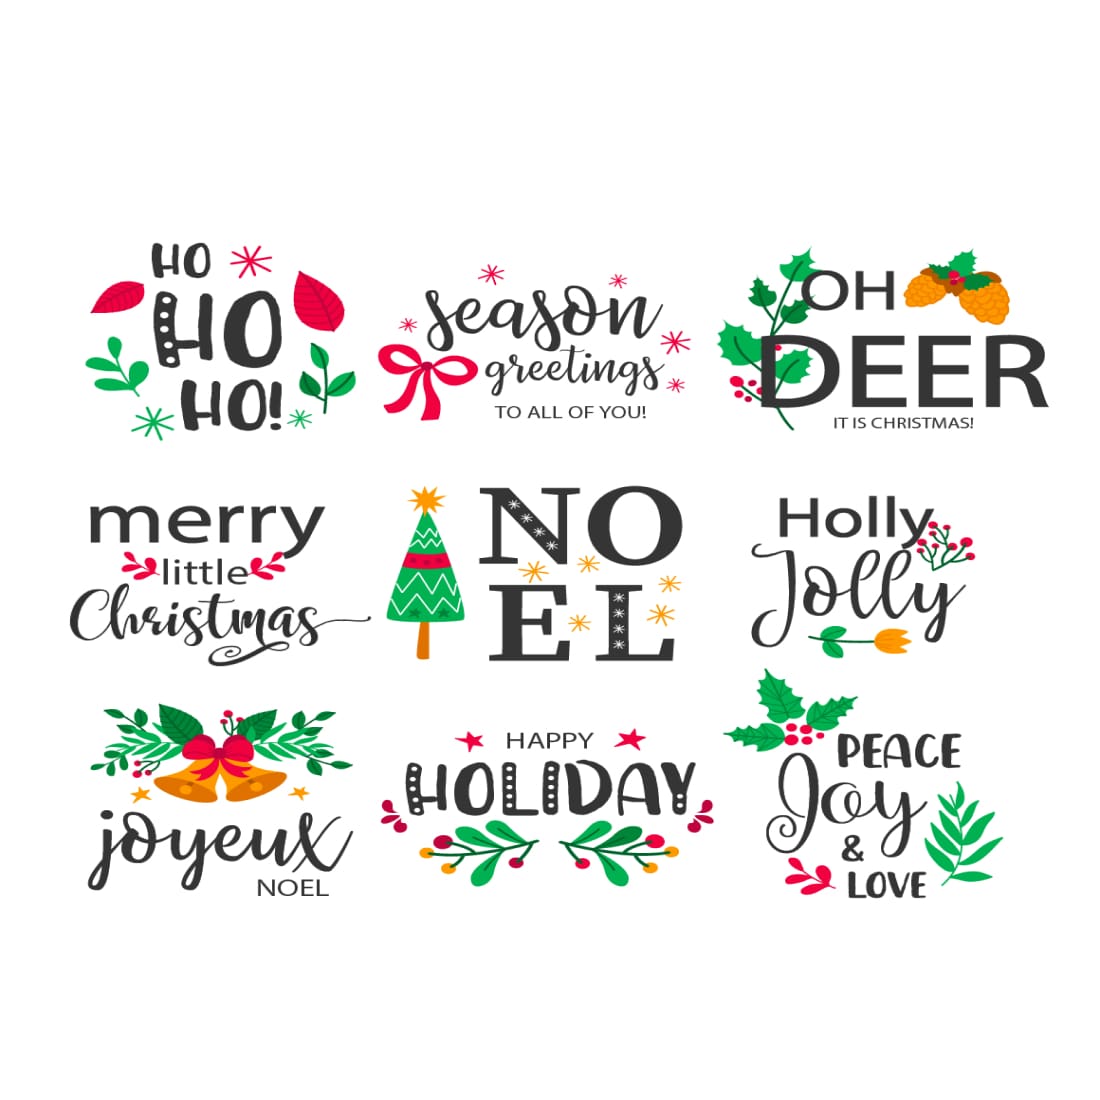 Christmas Badges with Lovely Hand Drawn Elements Quotes cover image.